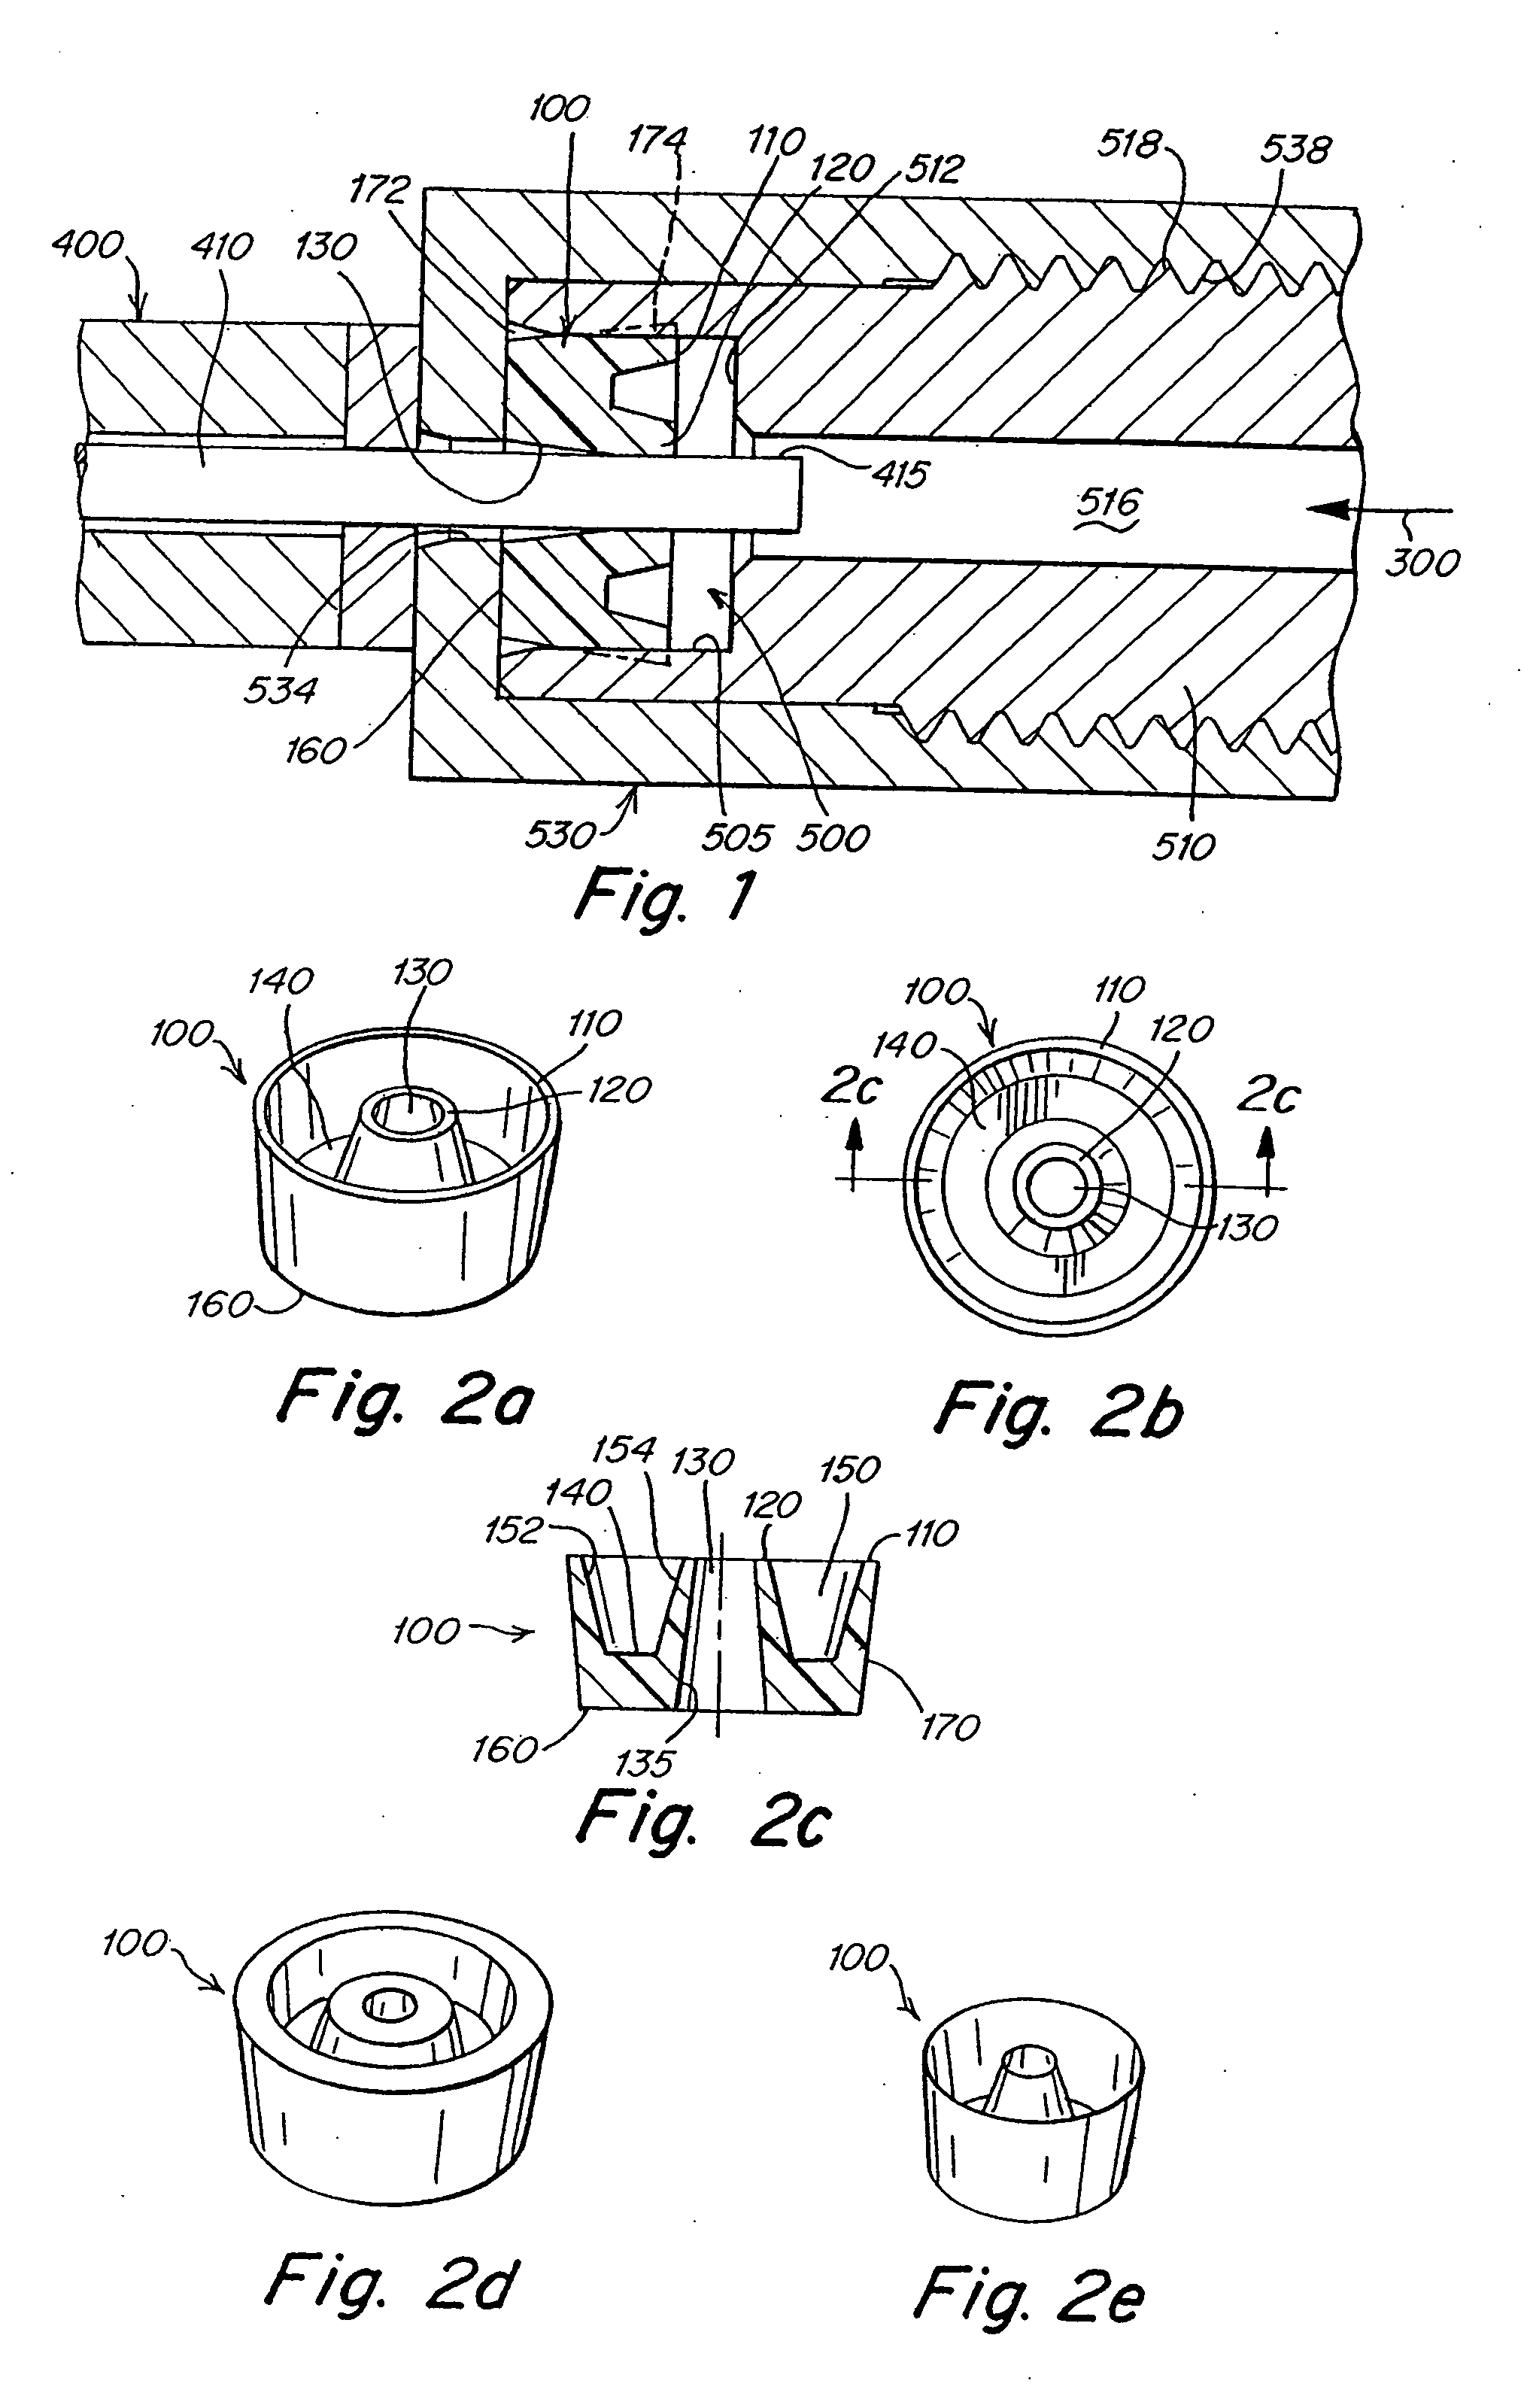 Medical device with high pressure quick disconnect handpiece